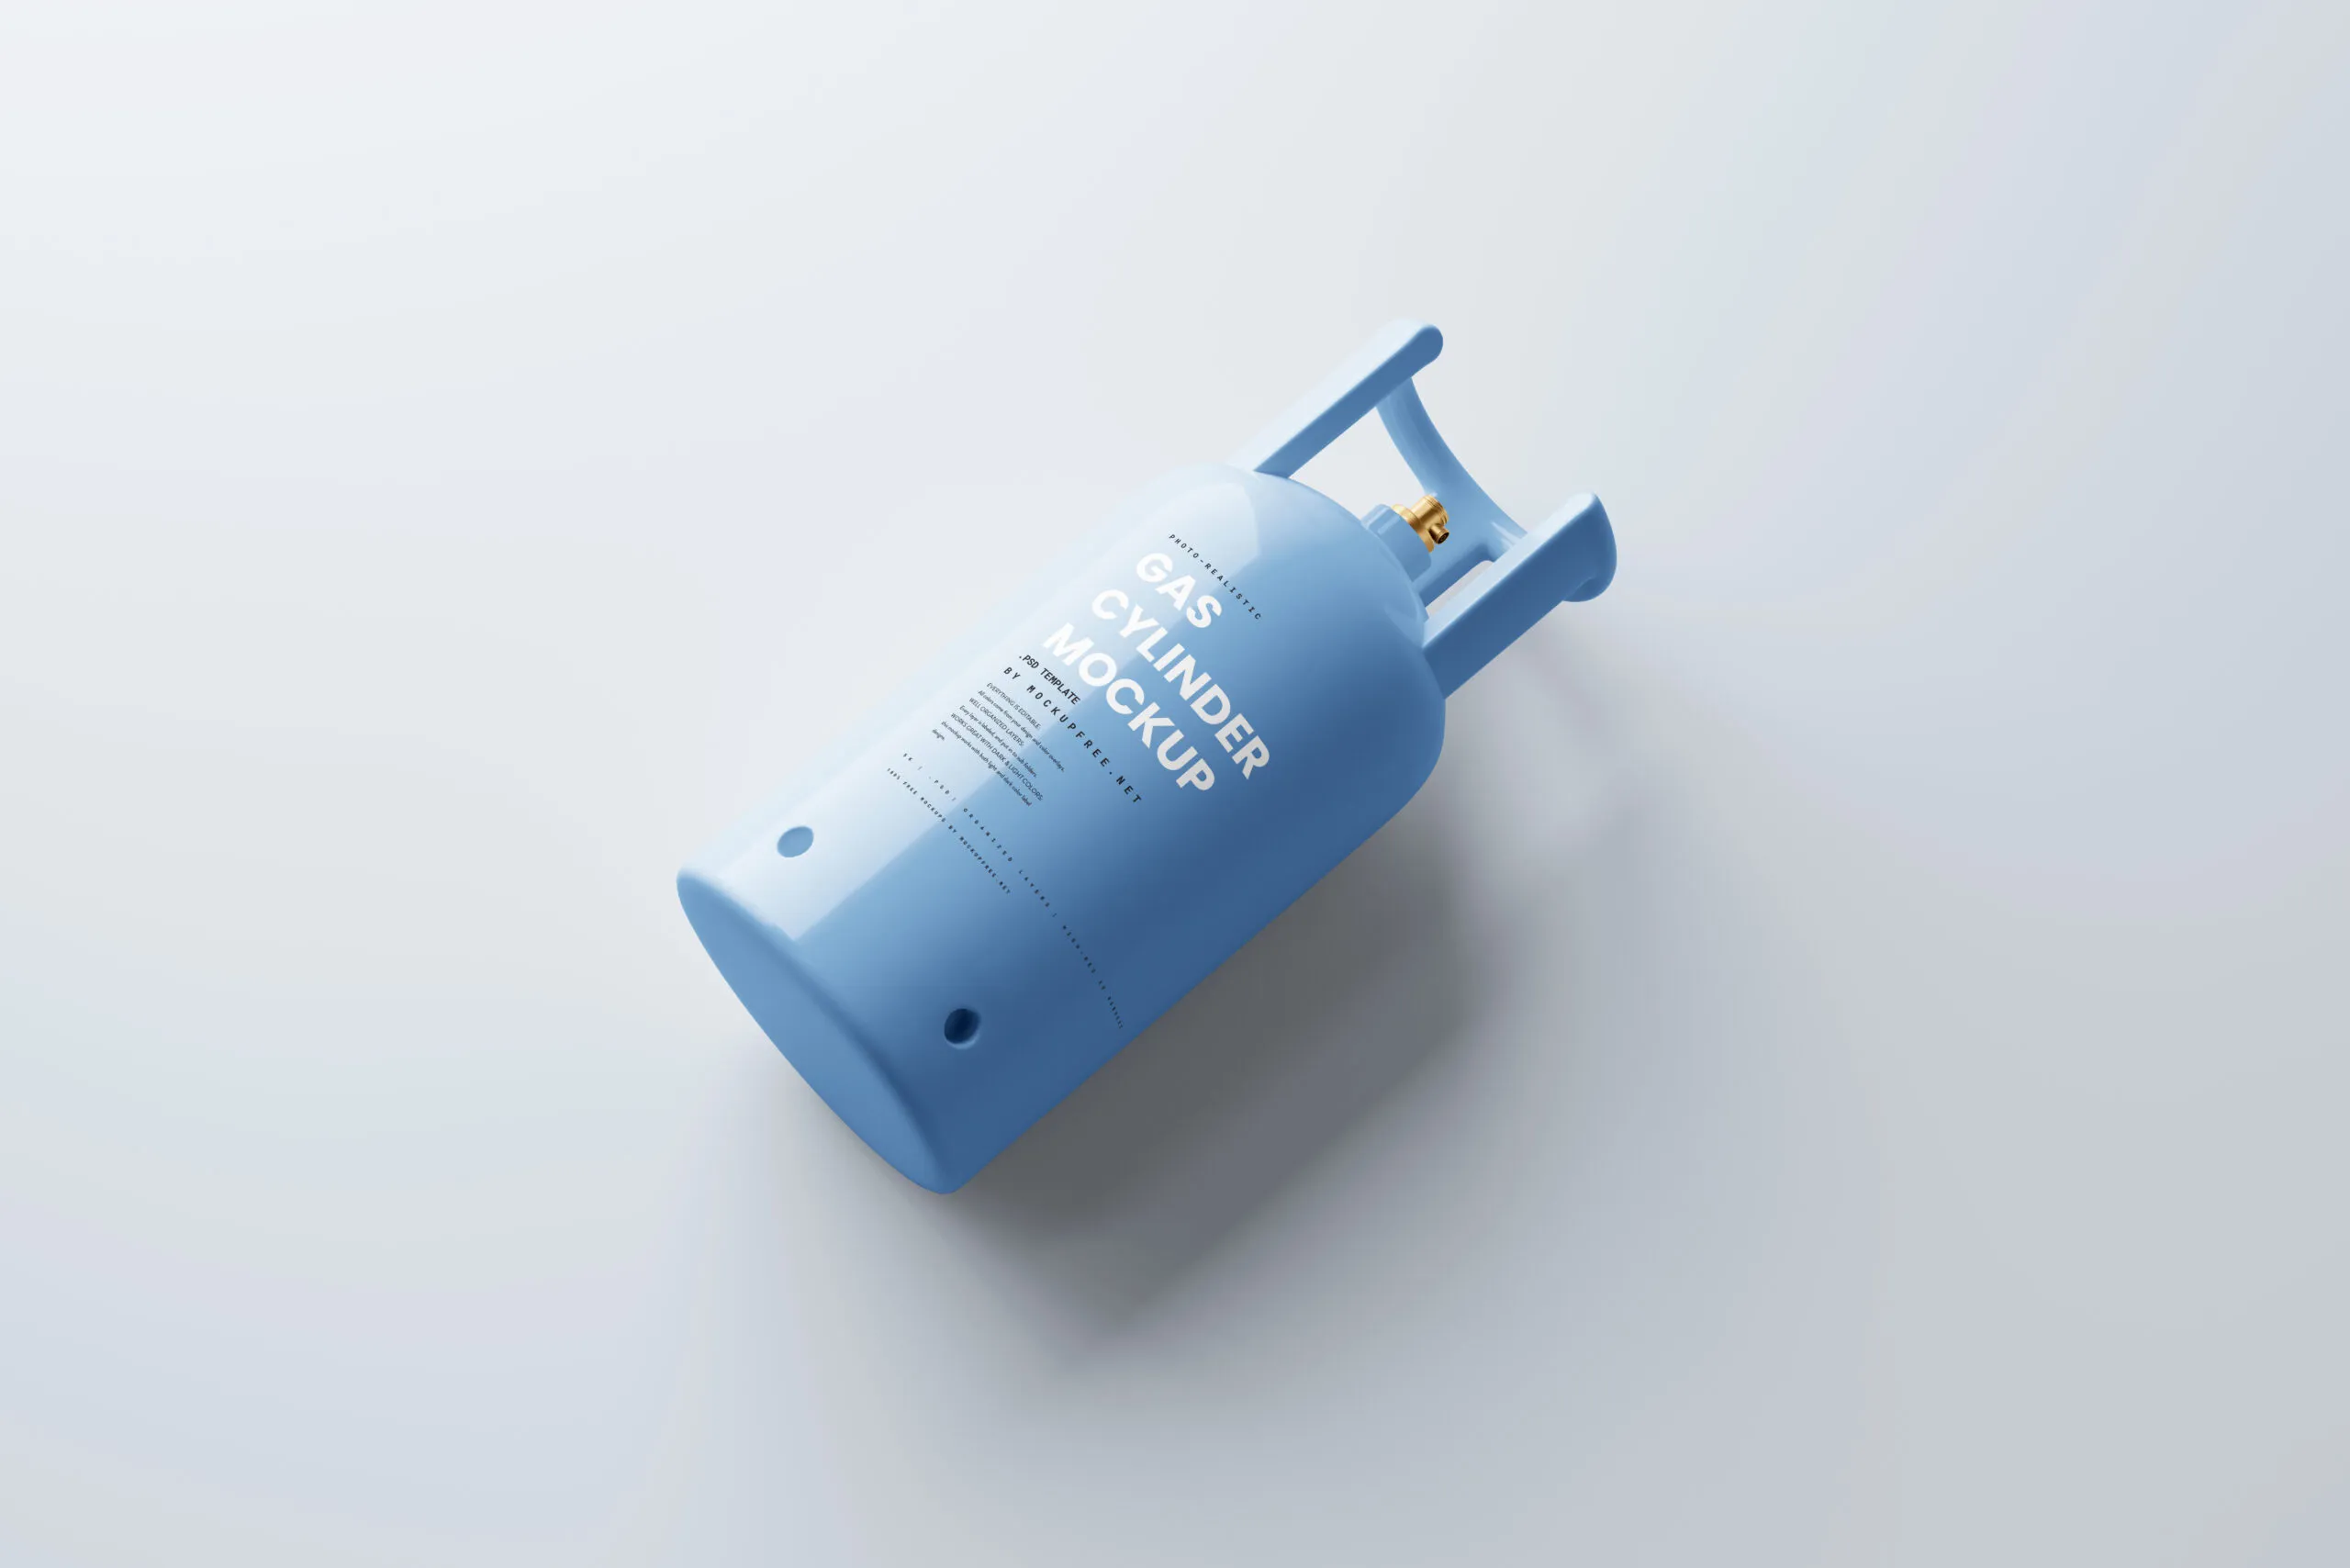 5 Gas Cylinder Mockup in Different Visions FREE PSD